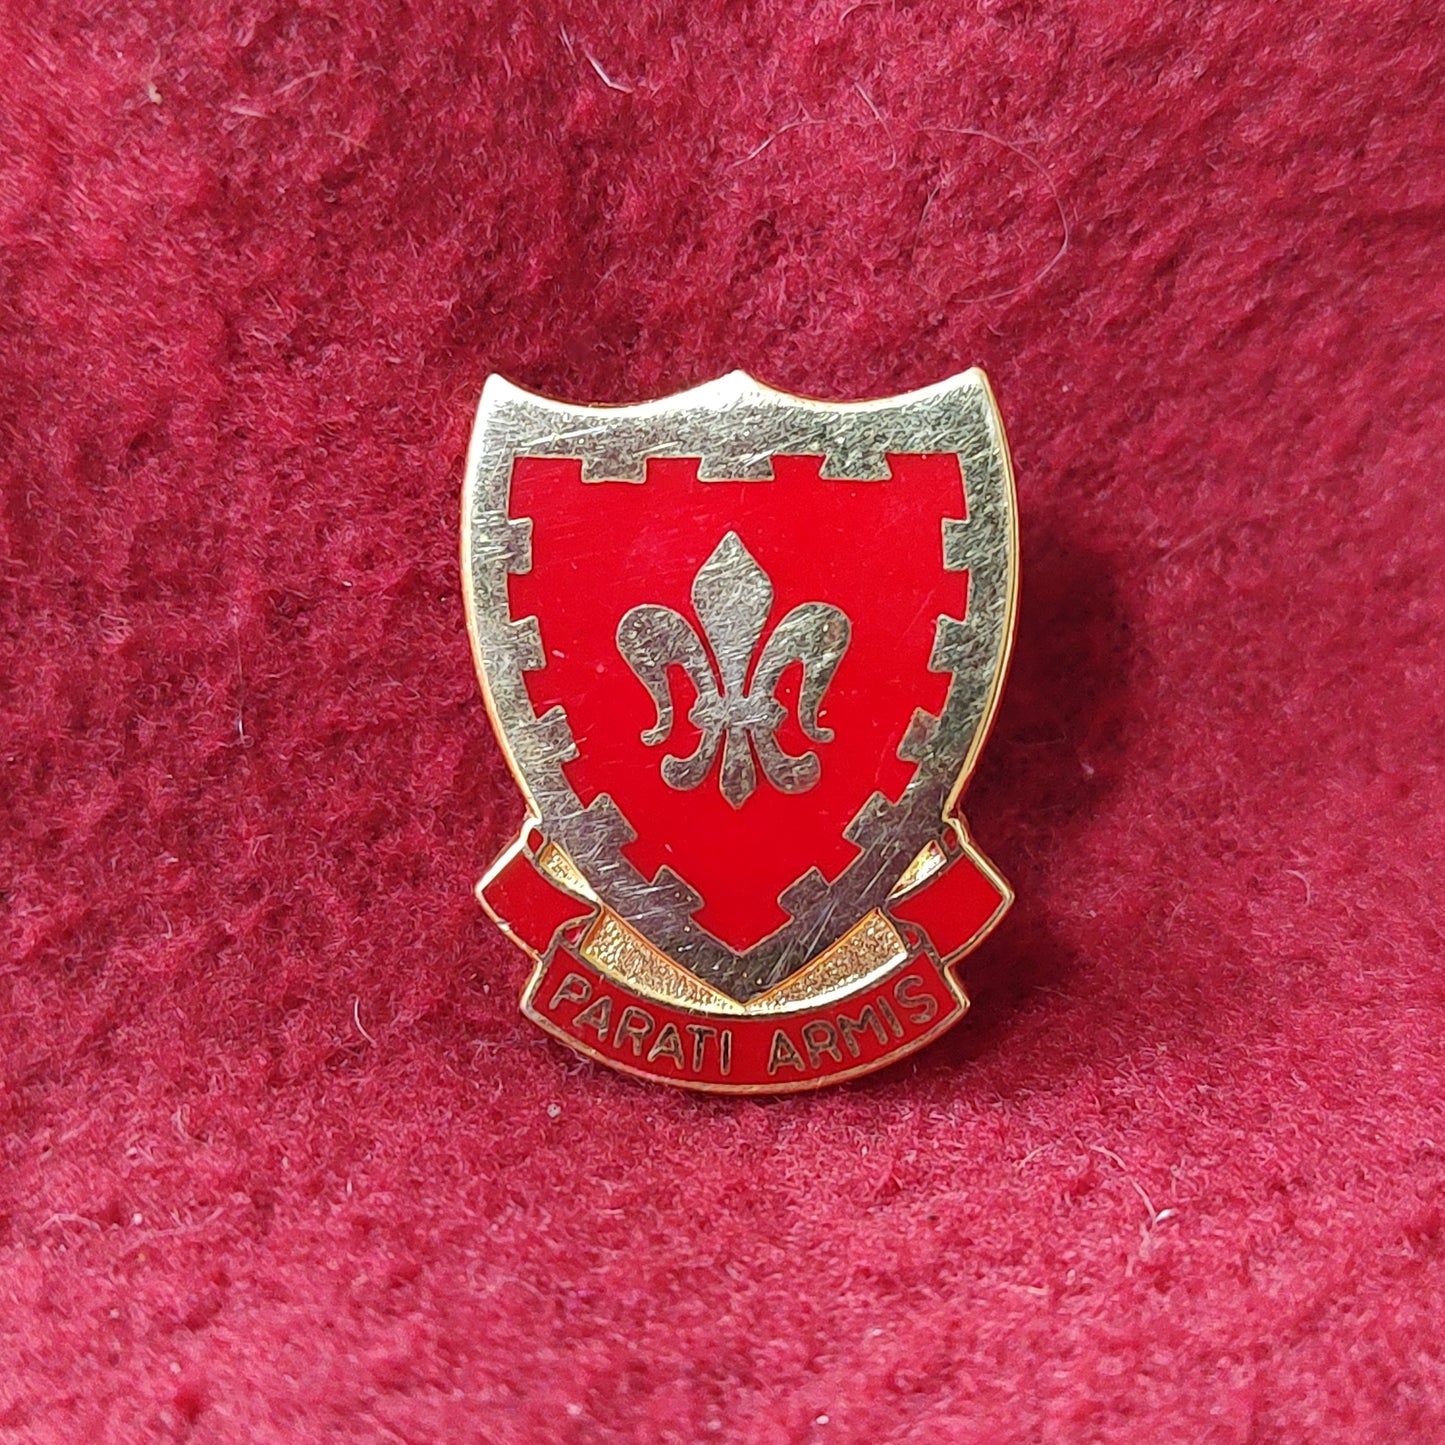 VINTAGE US Army 117th FIELD ARTILLERY Unit Crest Pin (11o48)